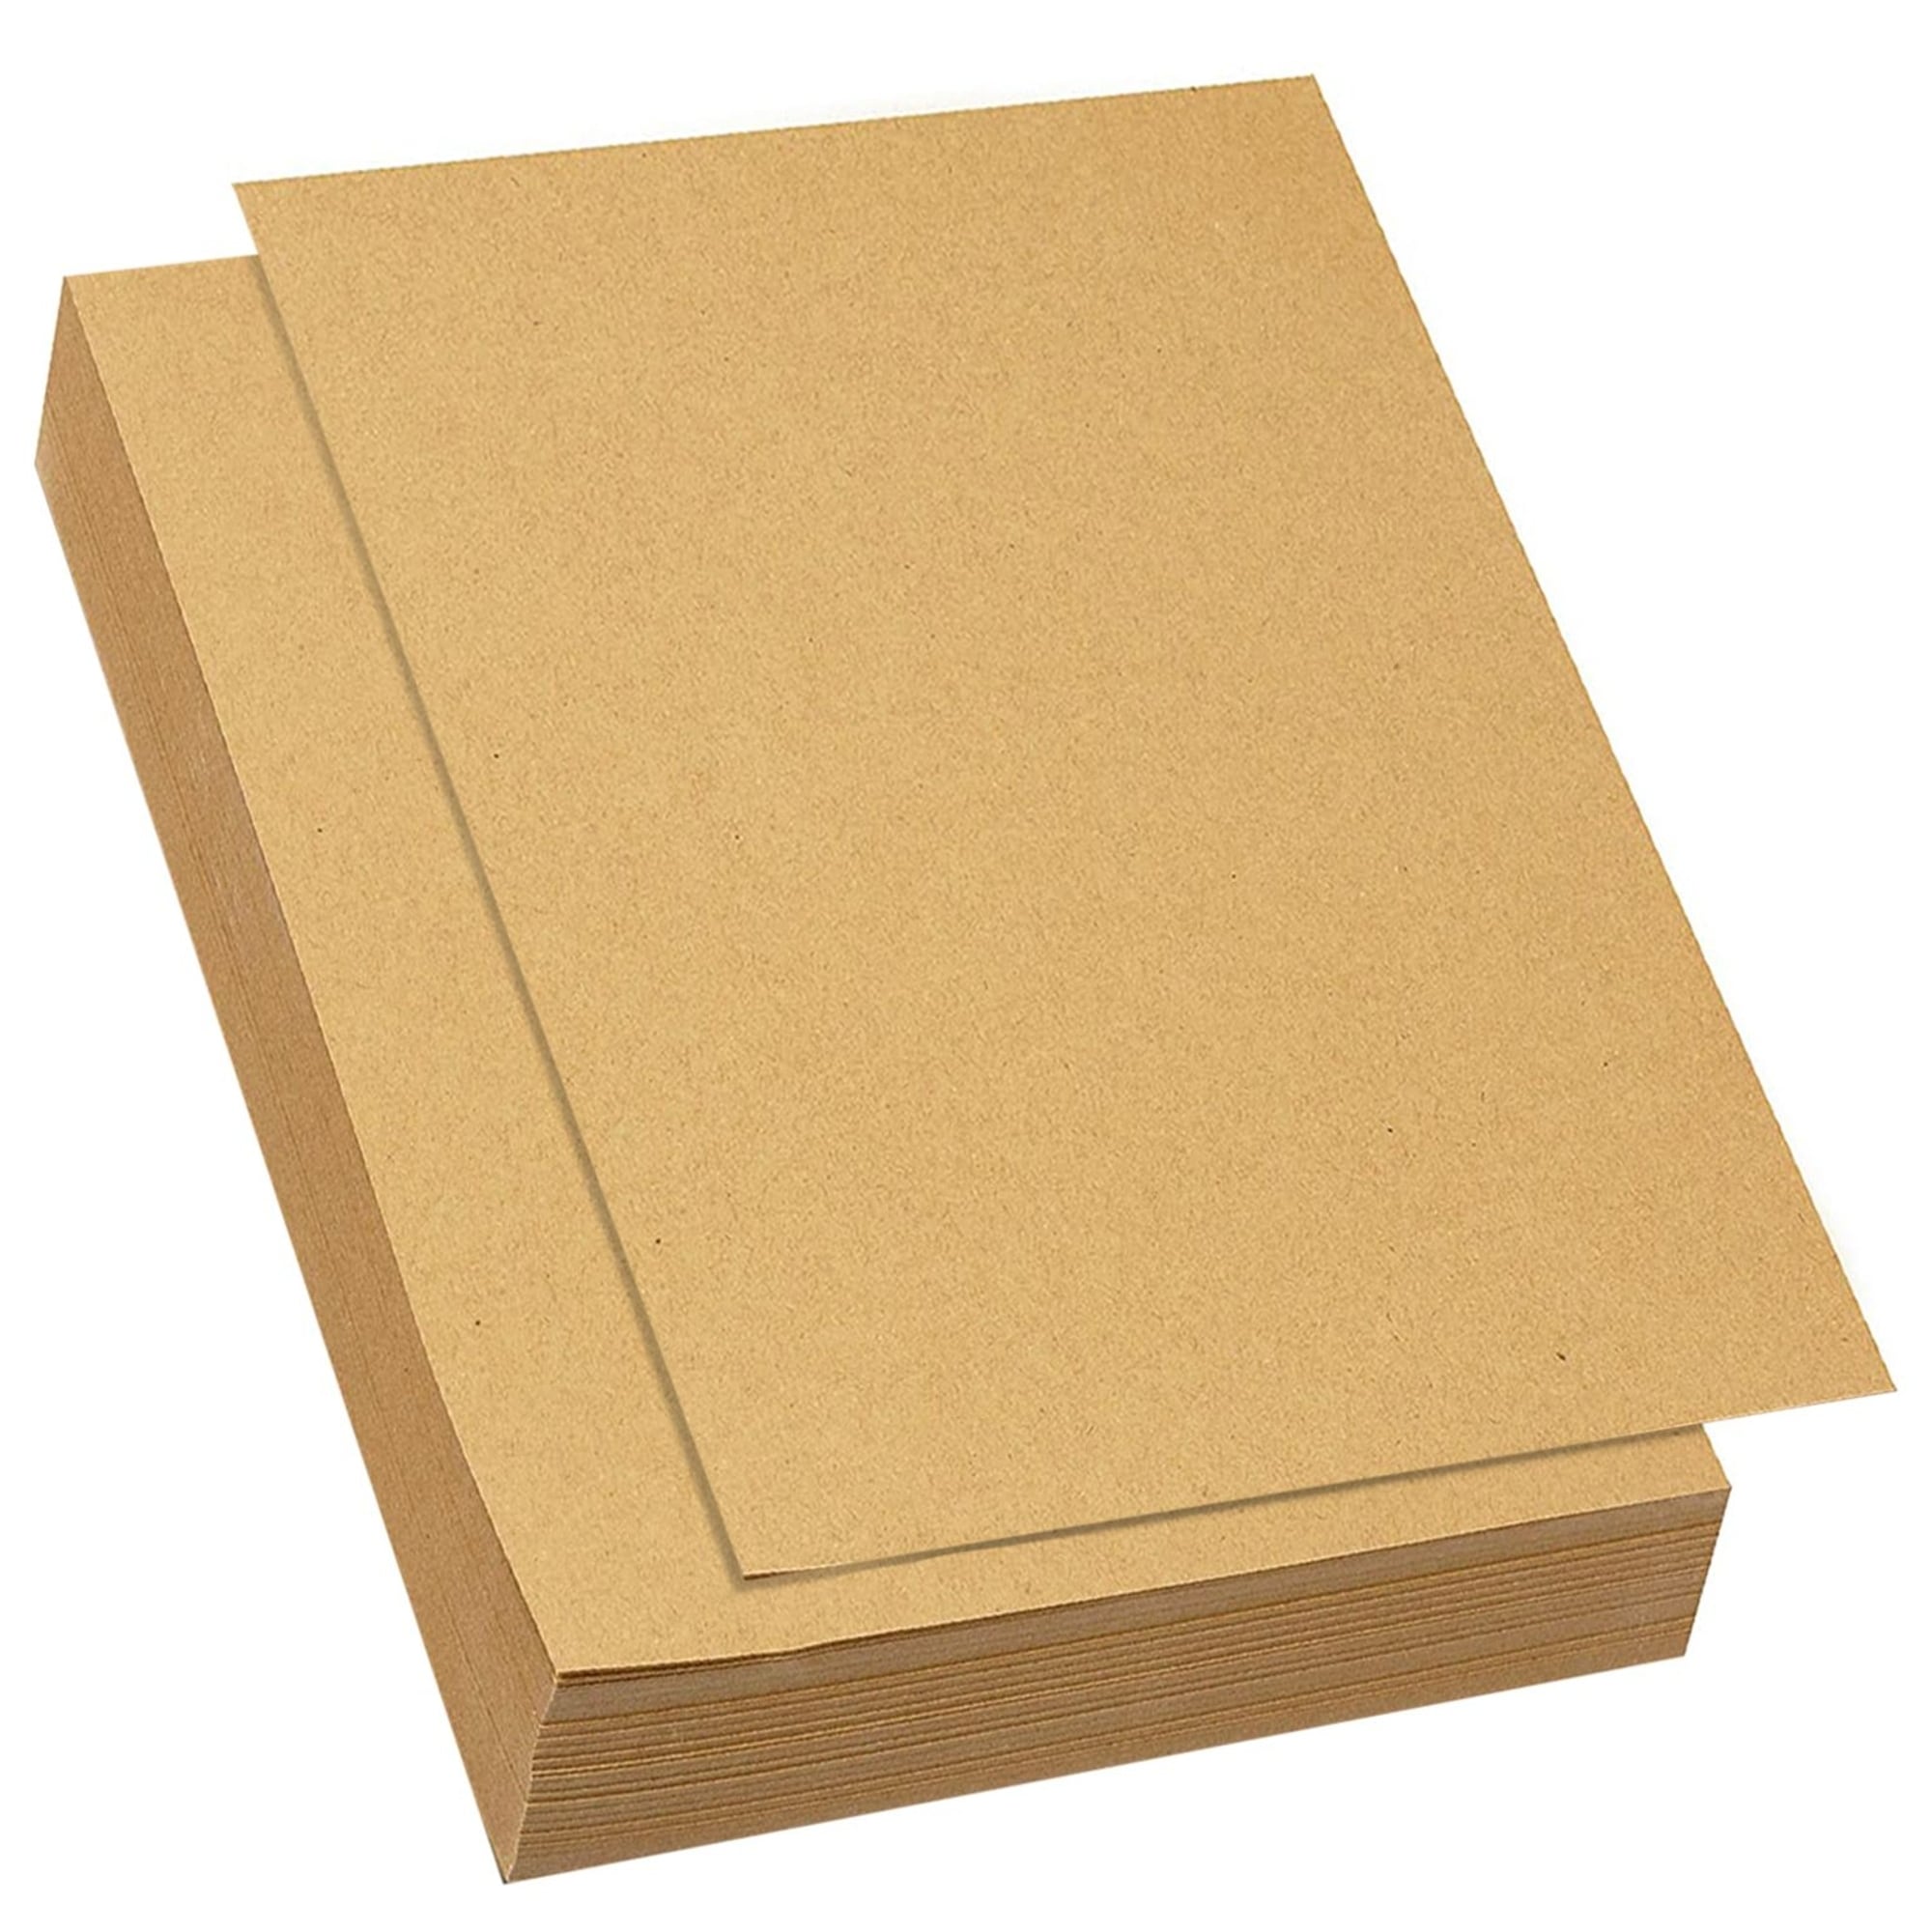 200 Pack Brown Craft Paper for DIY Projects, Classroom, Letter Size Kraft  Paper Material Sheets, 130gsm (8.5 x 11 In) - Bed Bath & Beyond - 37386922